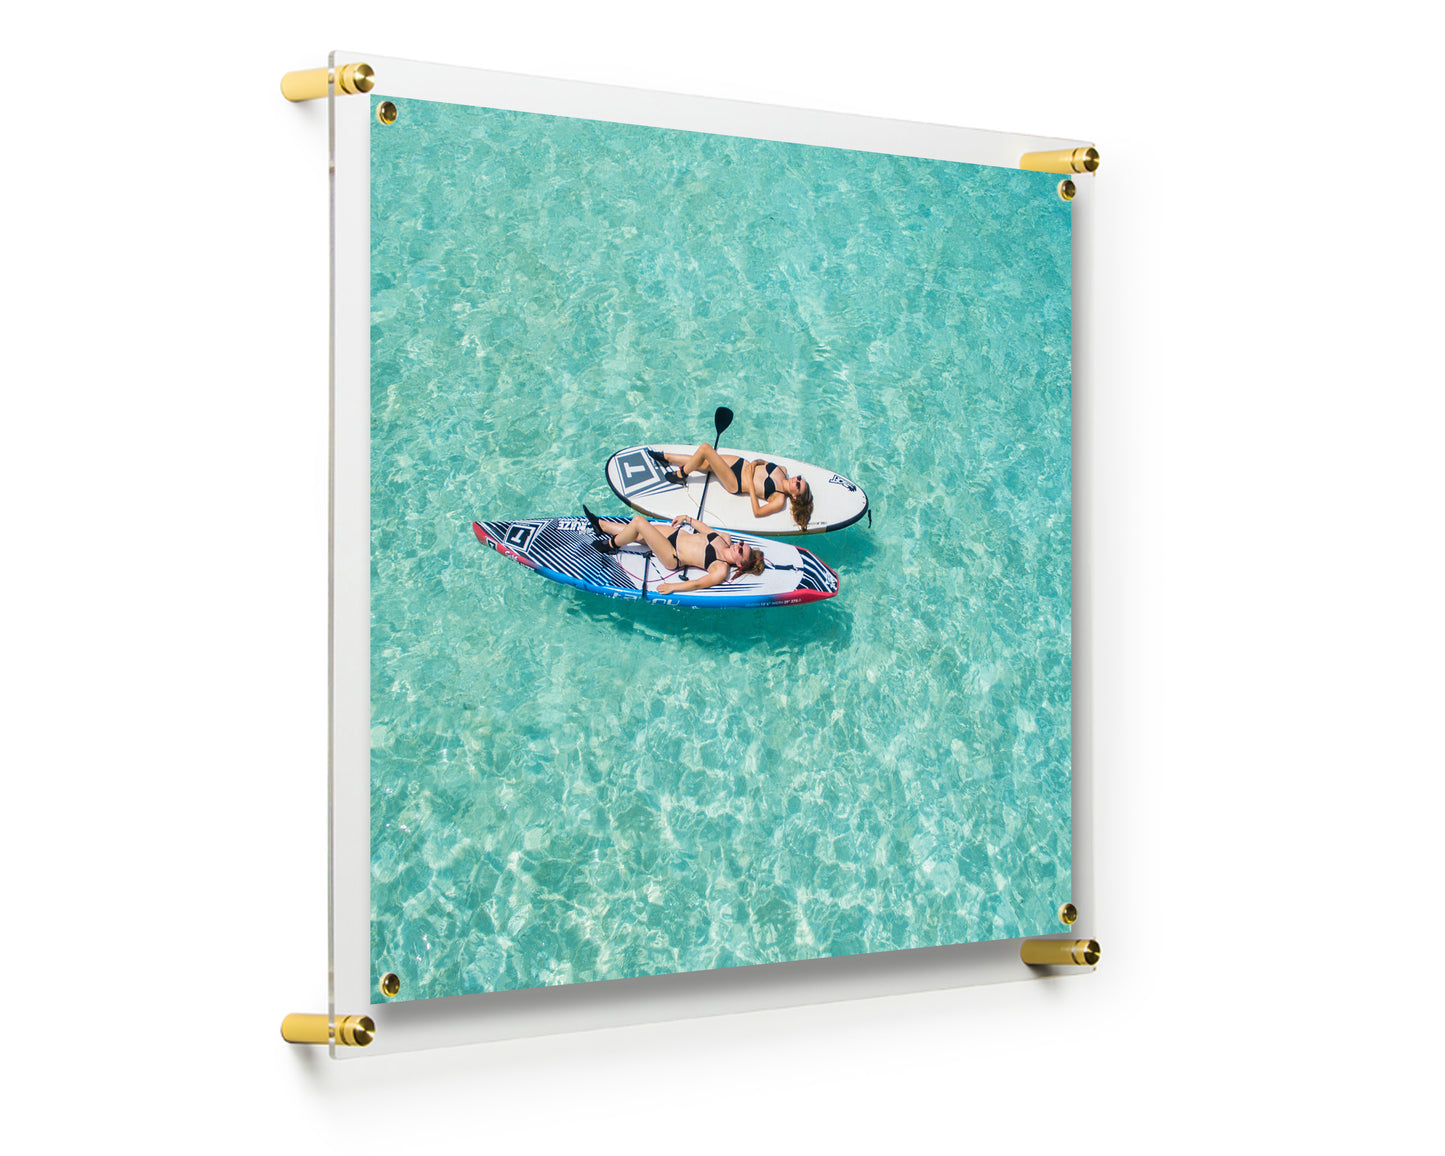 Case Pack of Four Units of 19 x 23" Poster Floating Acrylic Wall Frame for 16x20 Art